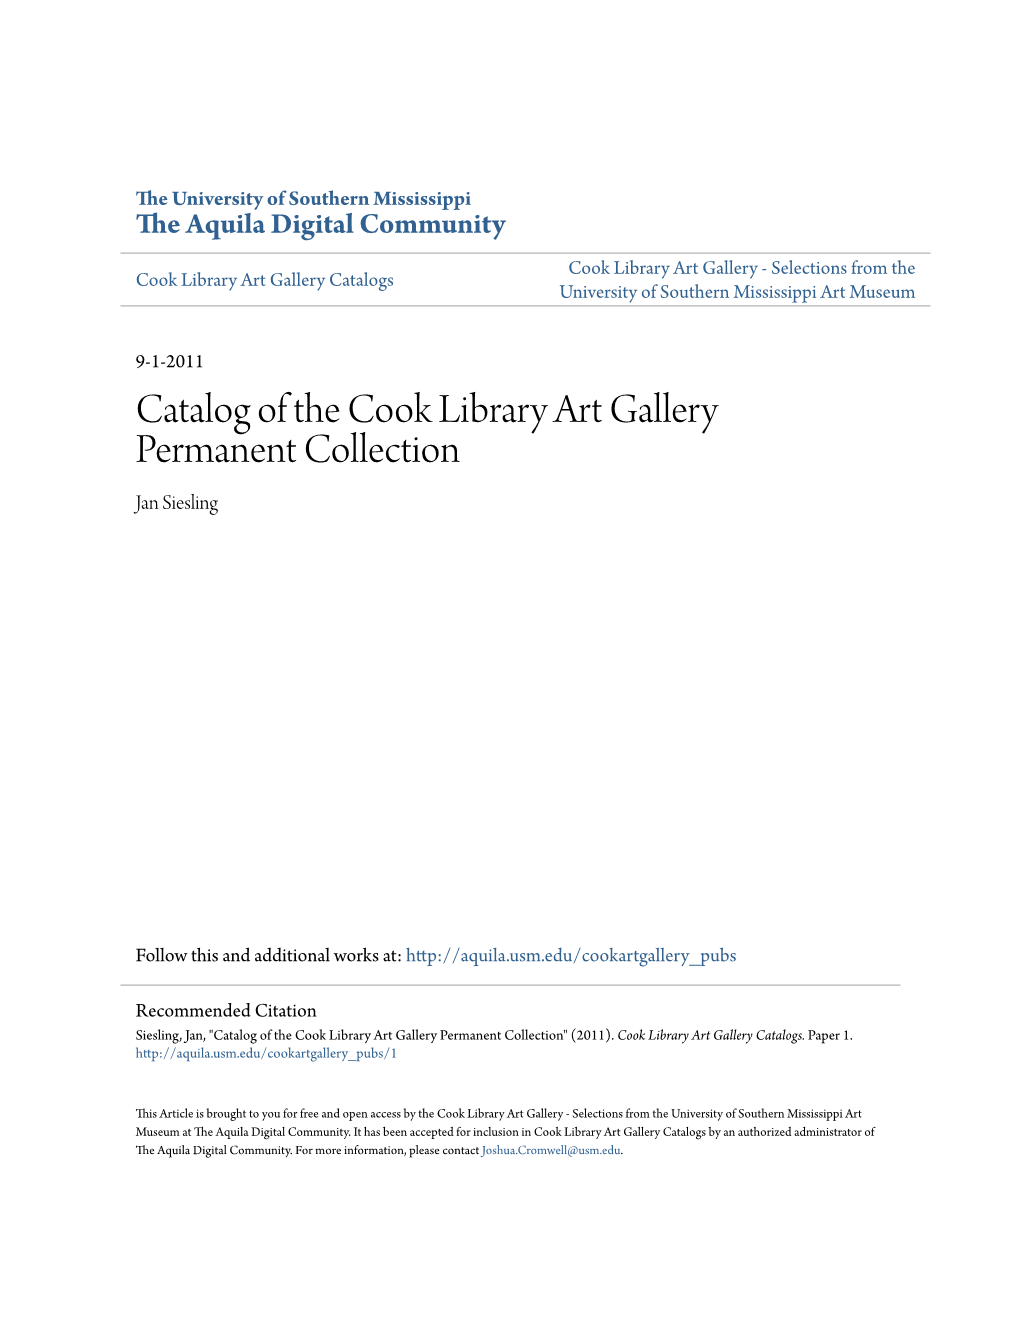 Catalog of the Cook Library Art Gallery Permanent Collection Jan Siesling